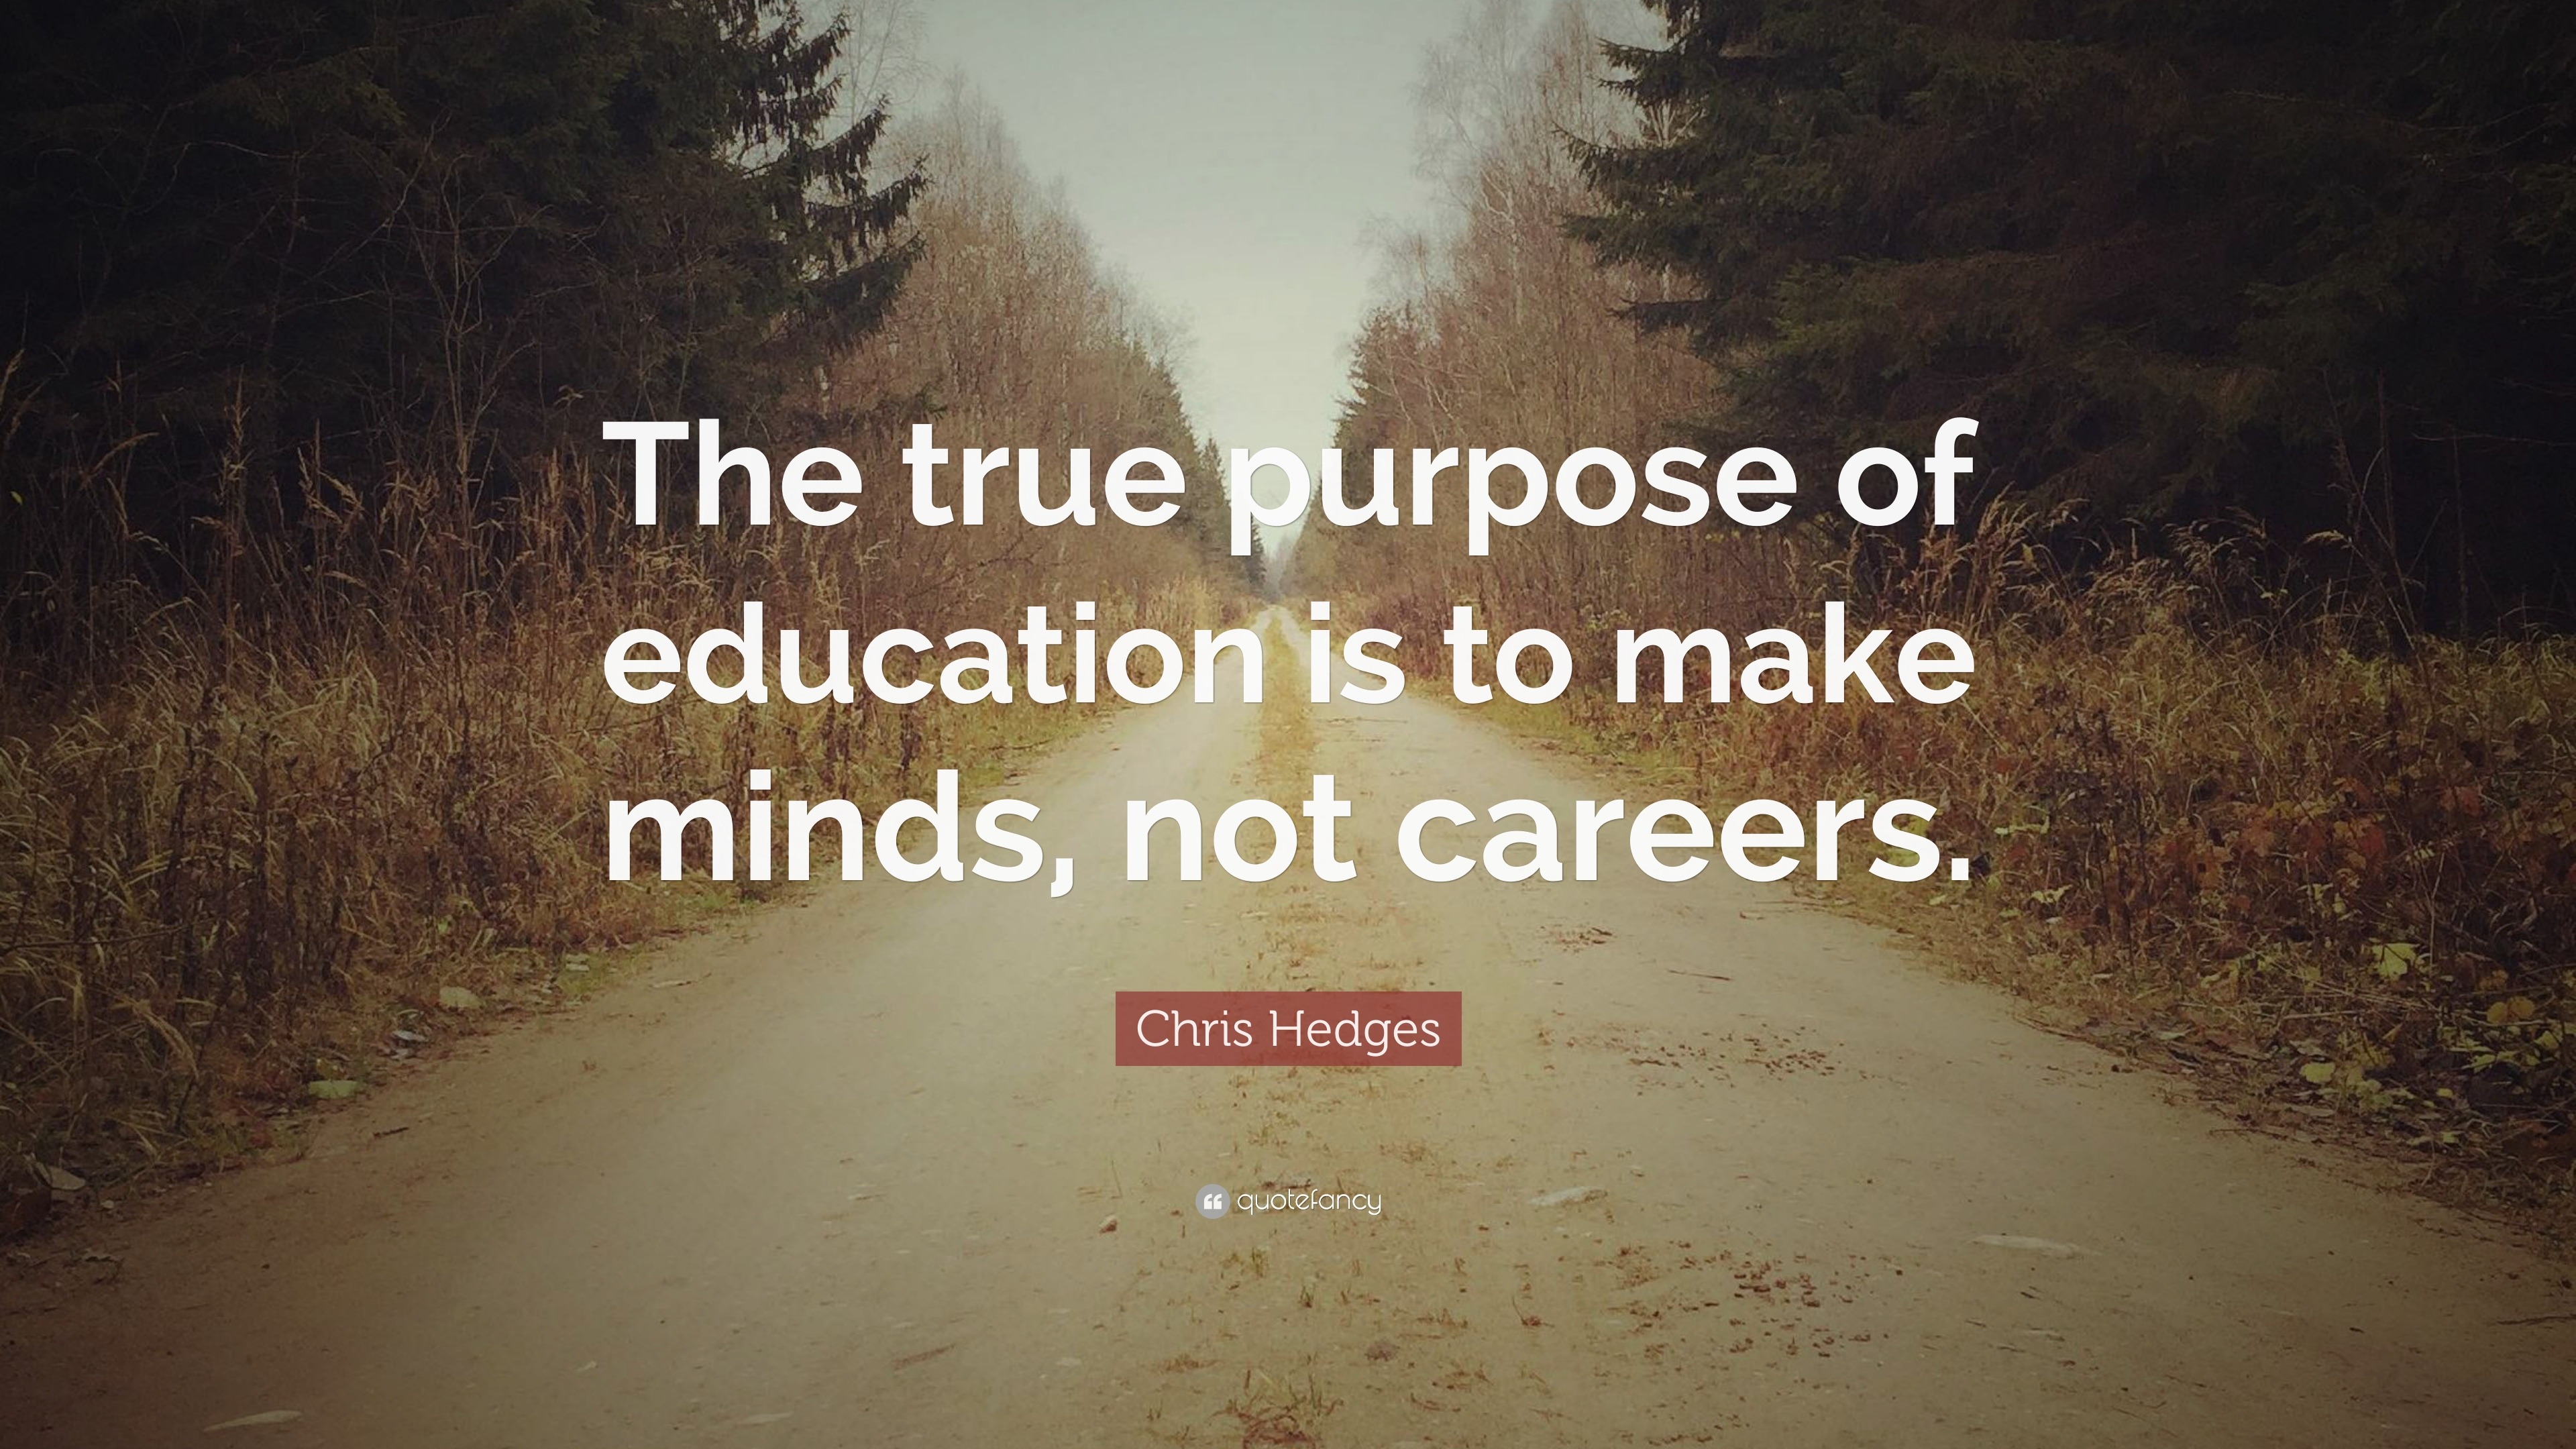 famous quotes about education